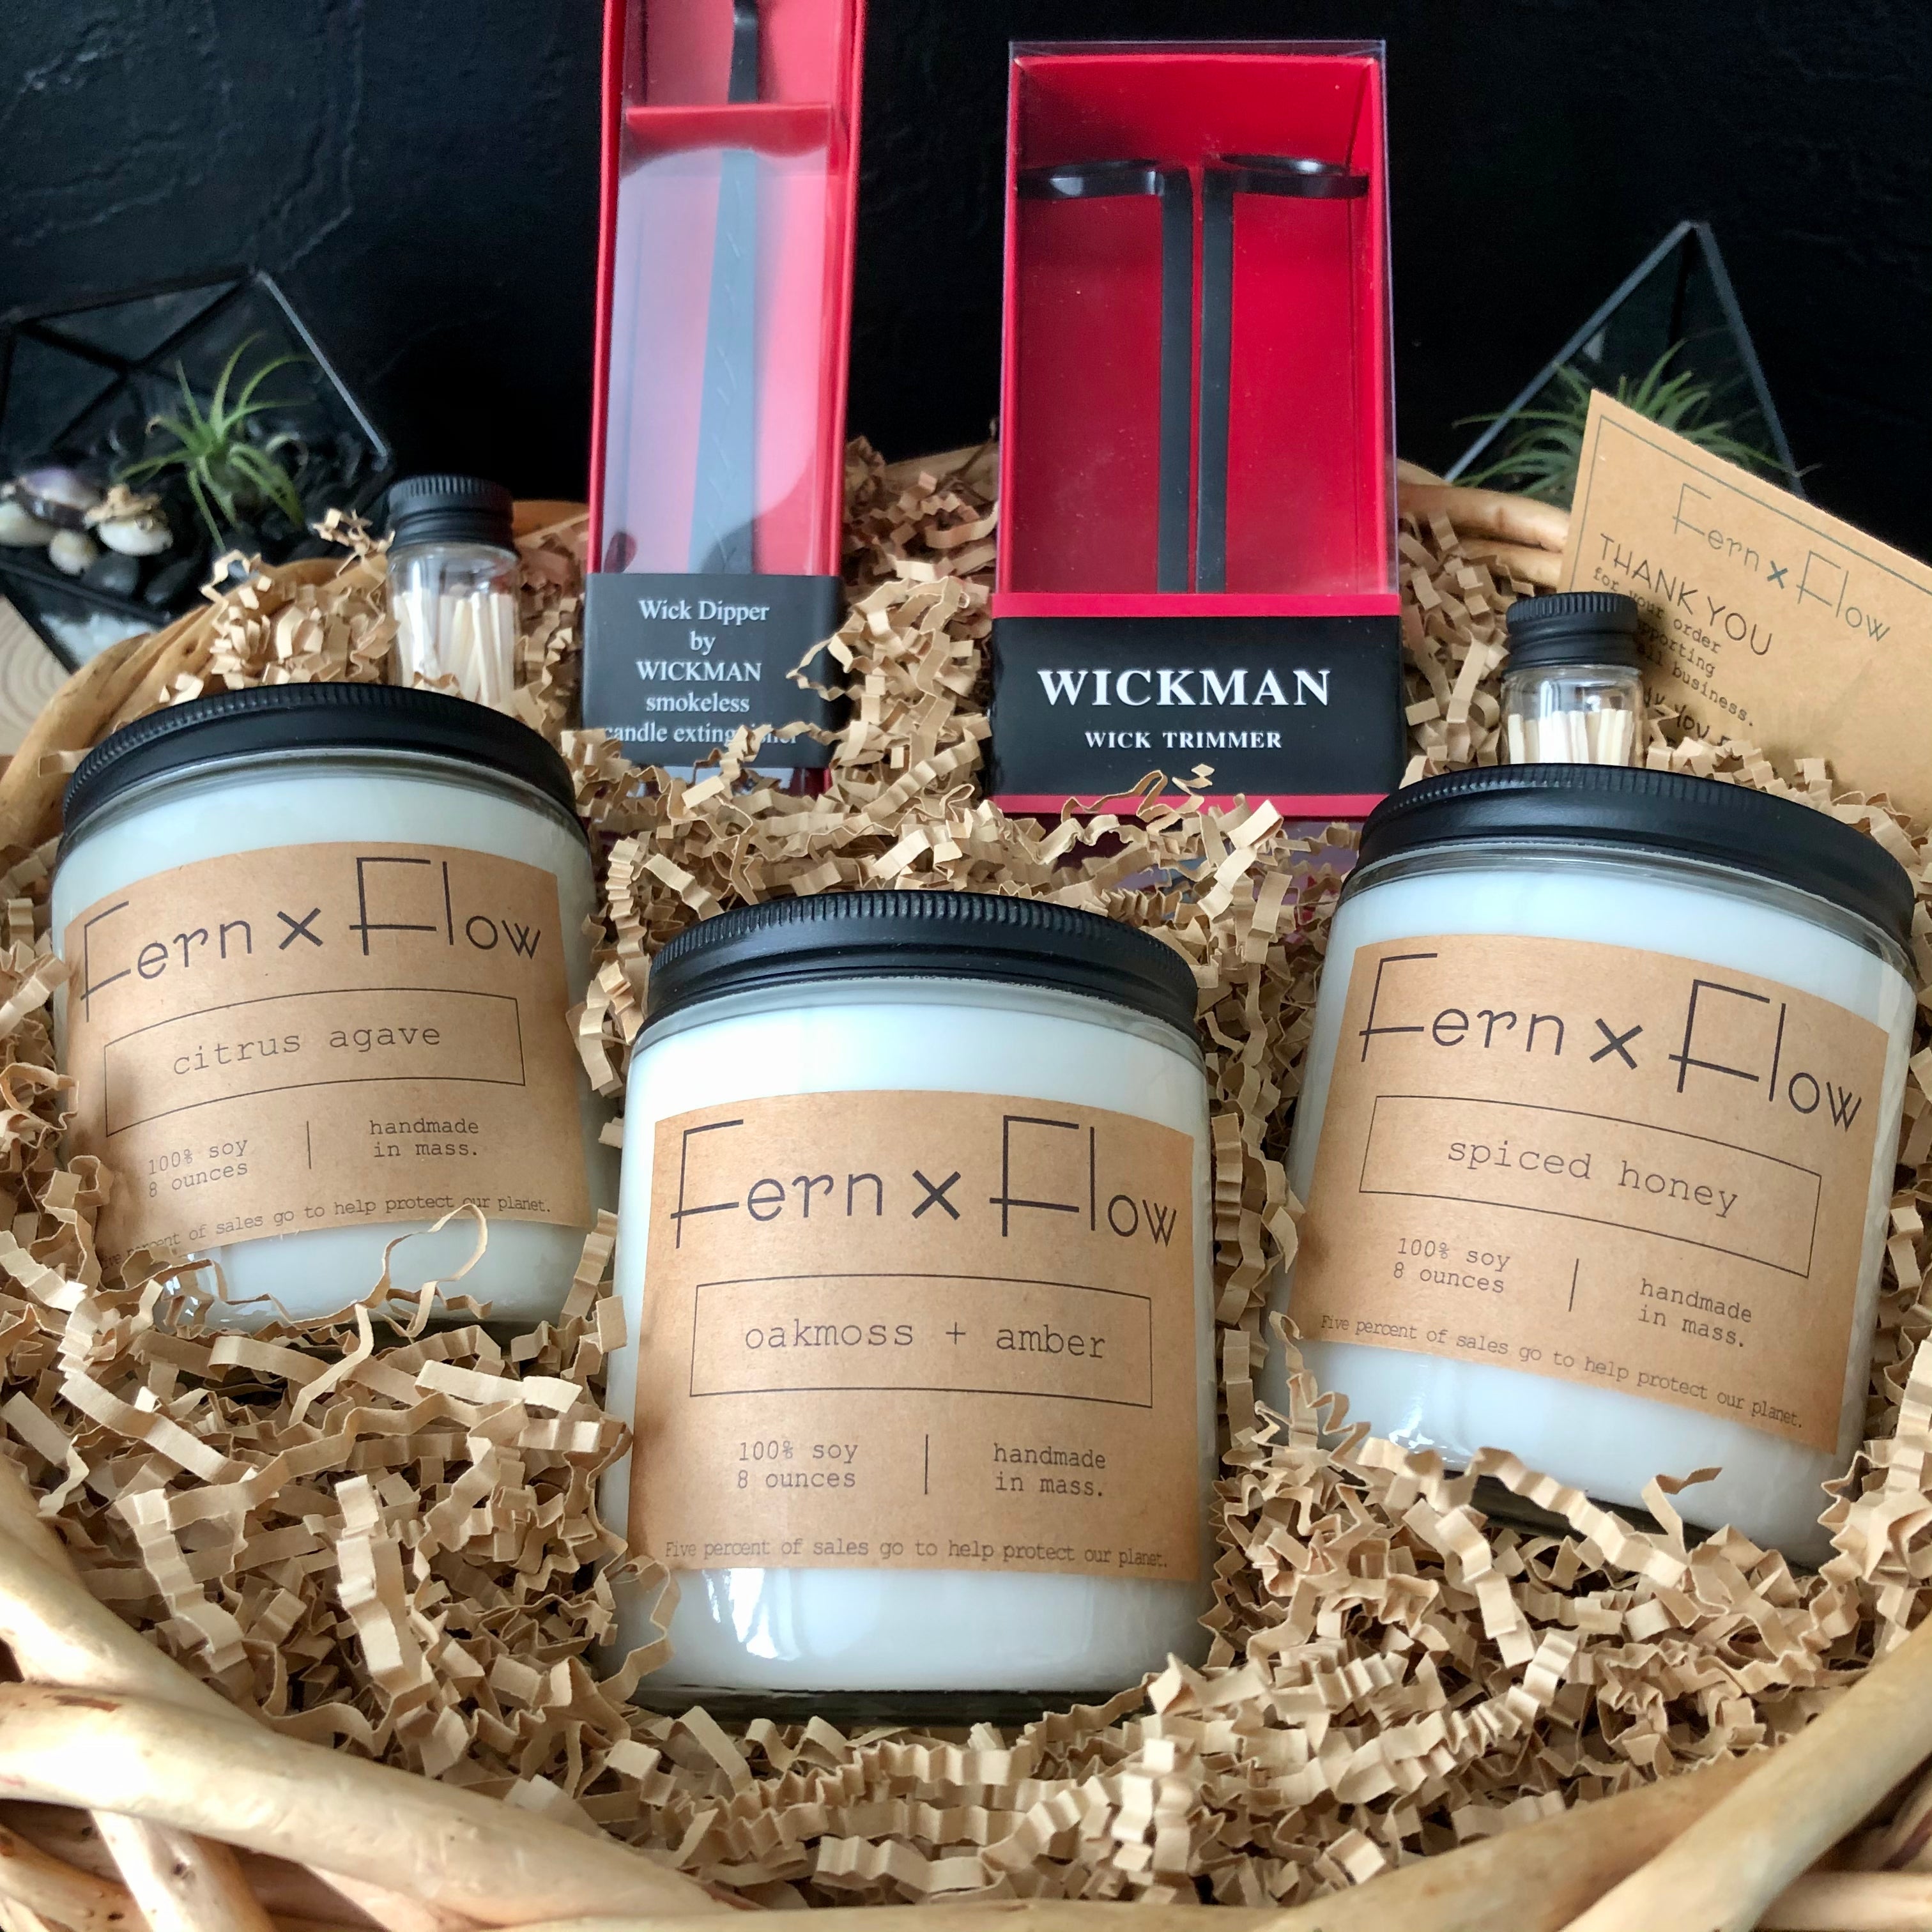 Fern x Flow soy candle gift basket featuring their Signature collection of soy candles and candle accessories in a gift basket.